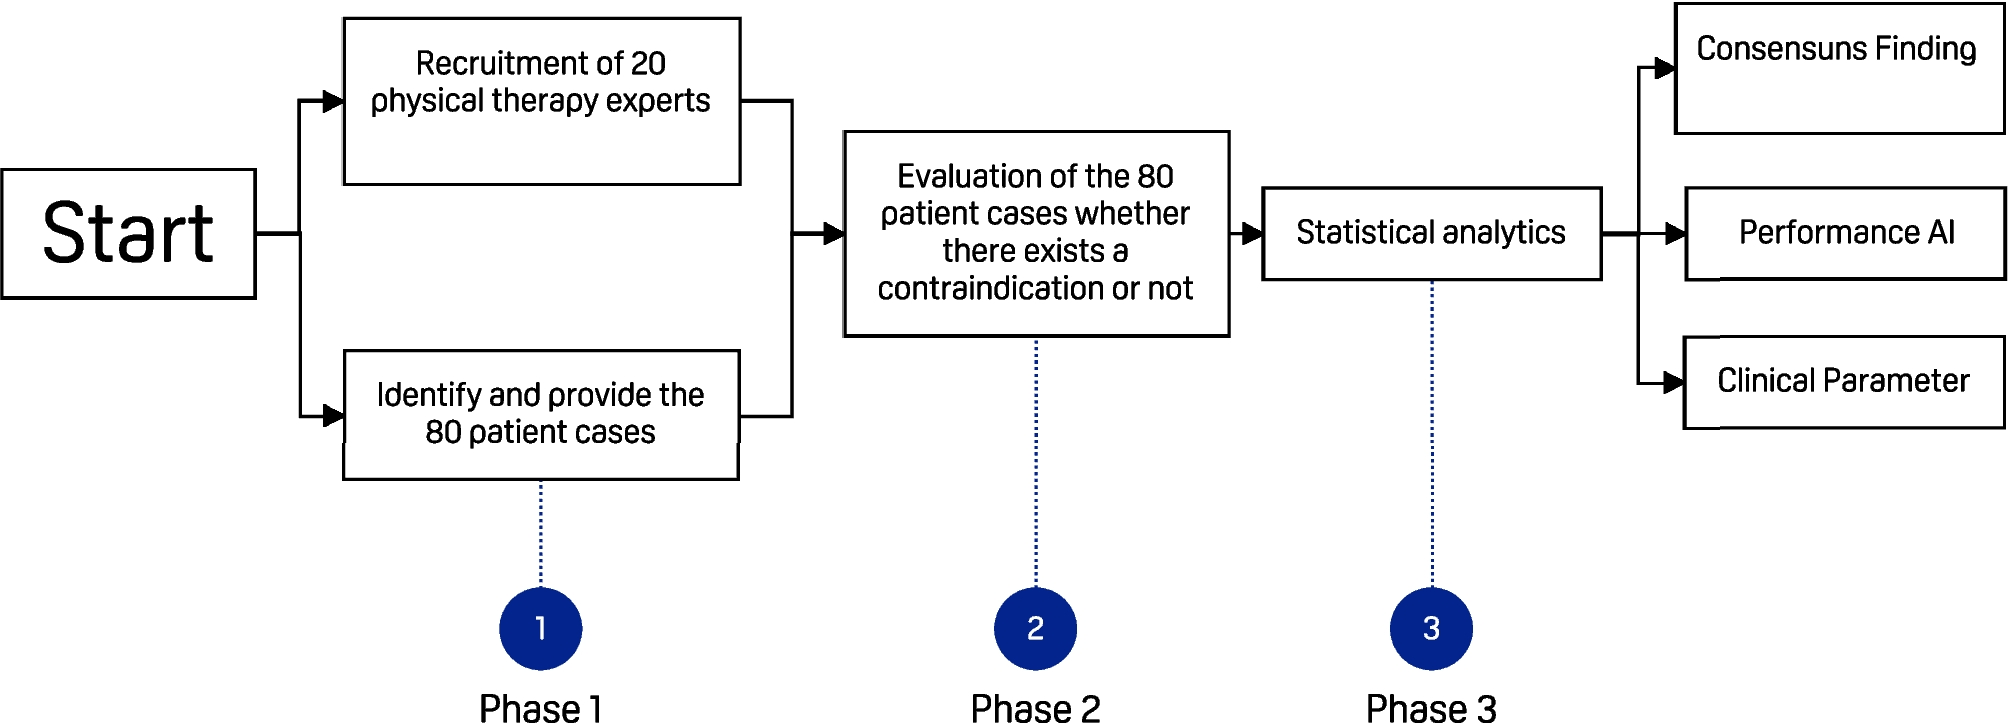 Evaluation of the accuracy of an artificial intelligence in identifying contraindications to exercise therapy - Comparison with and interrater reliability of physical therapists judgments